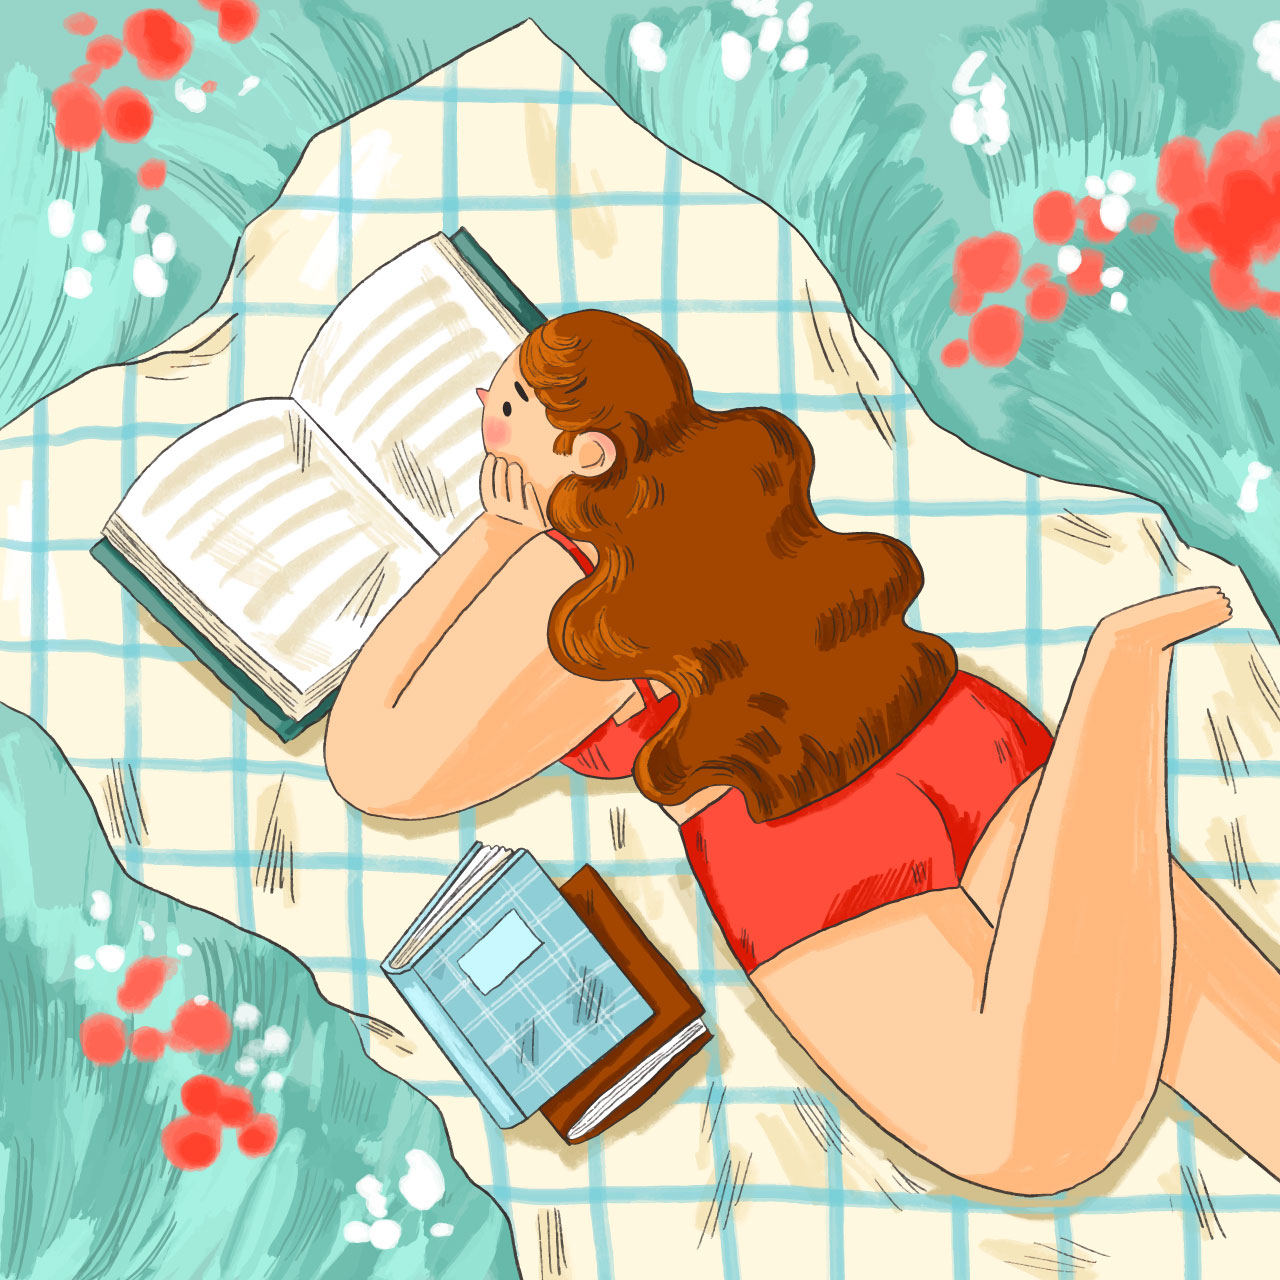 Hand drawn summer reading books illustration with woman